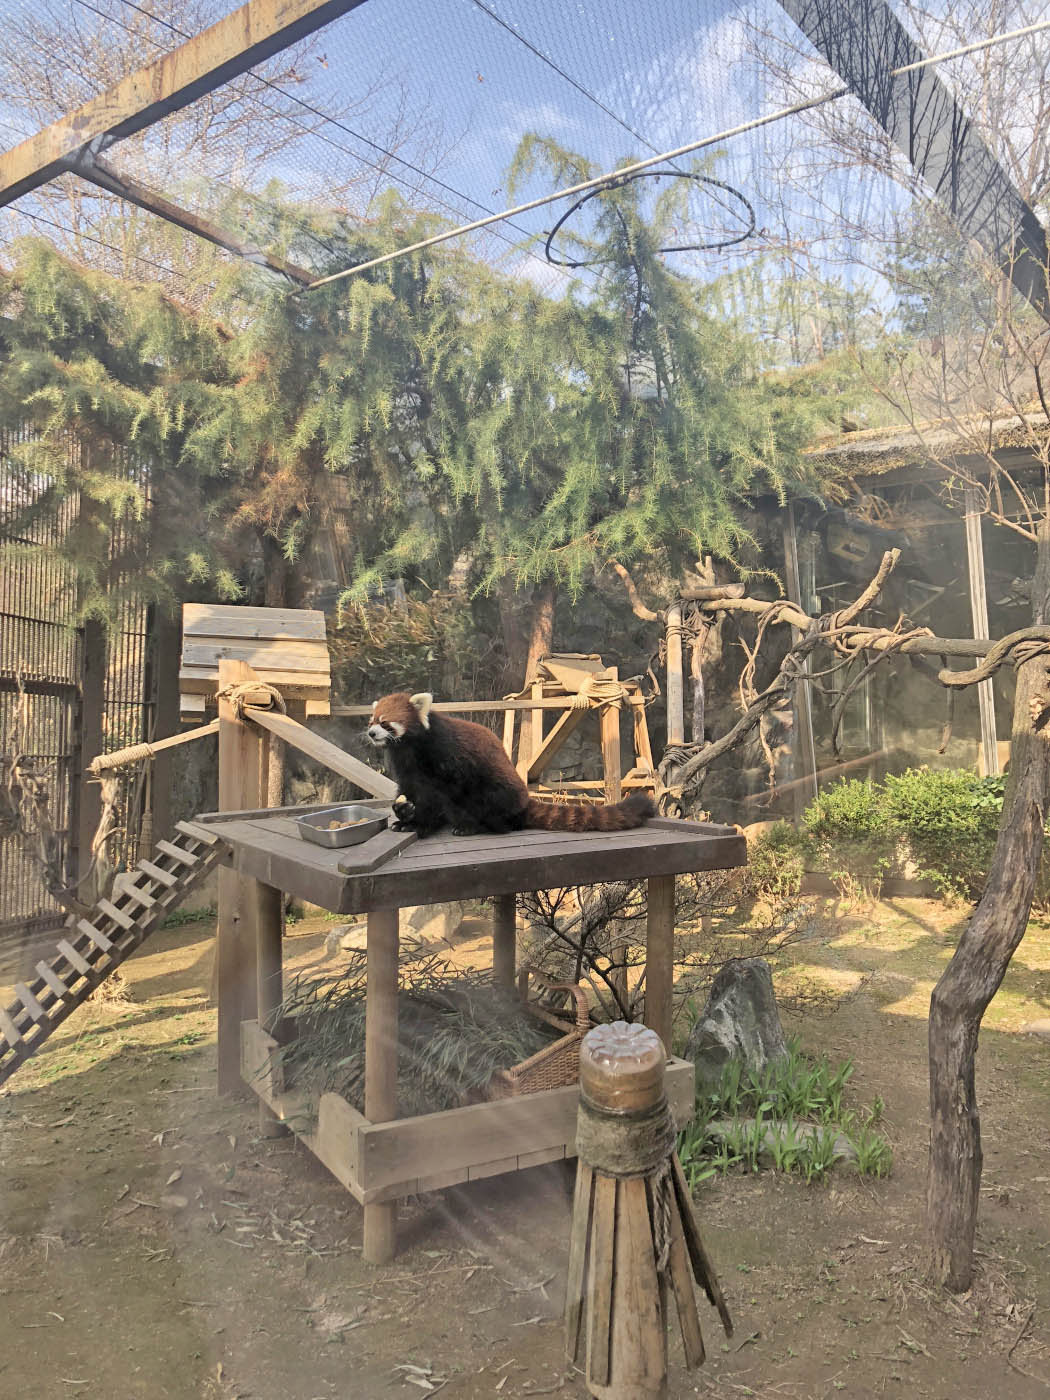 A weekend in Seoul and animals in Zoos